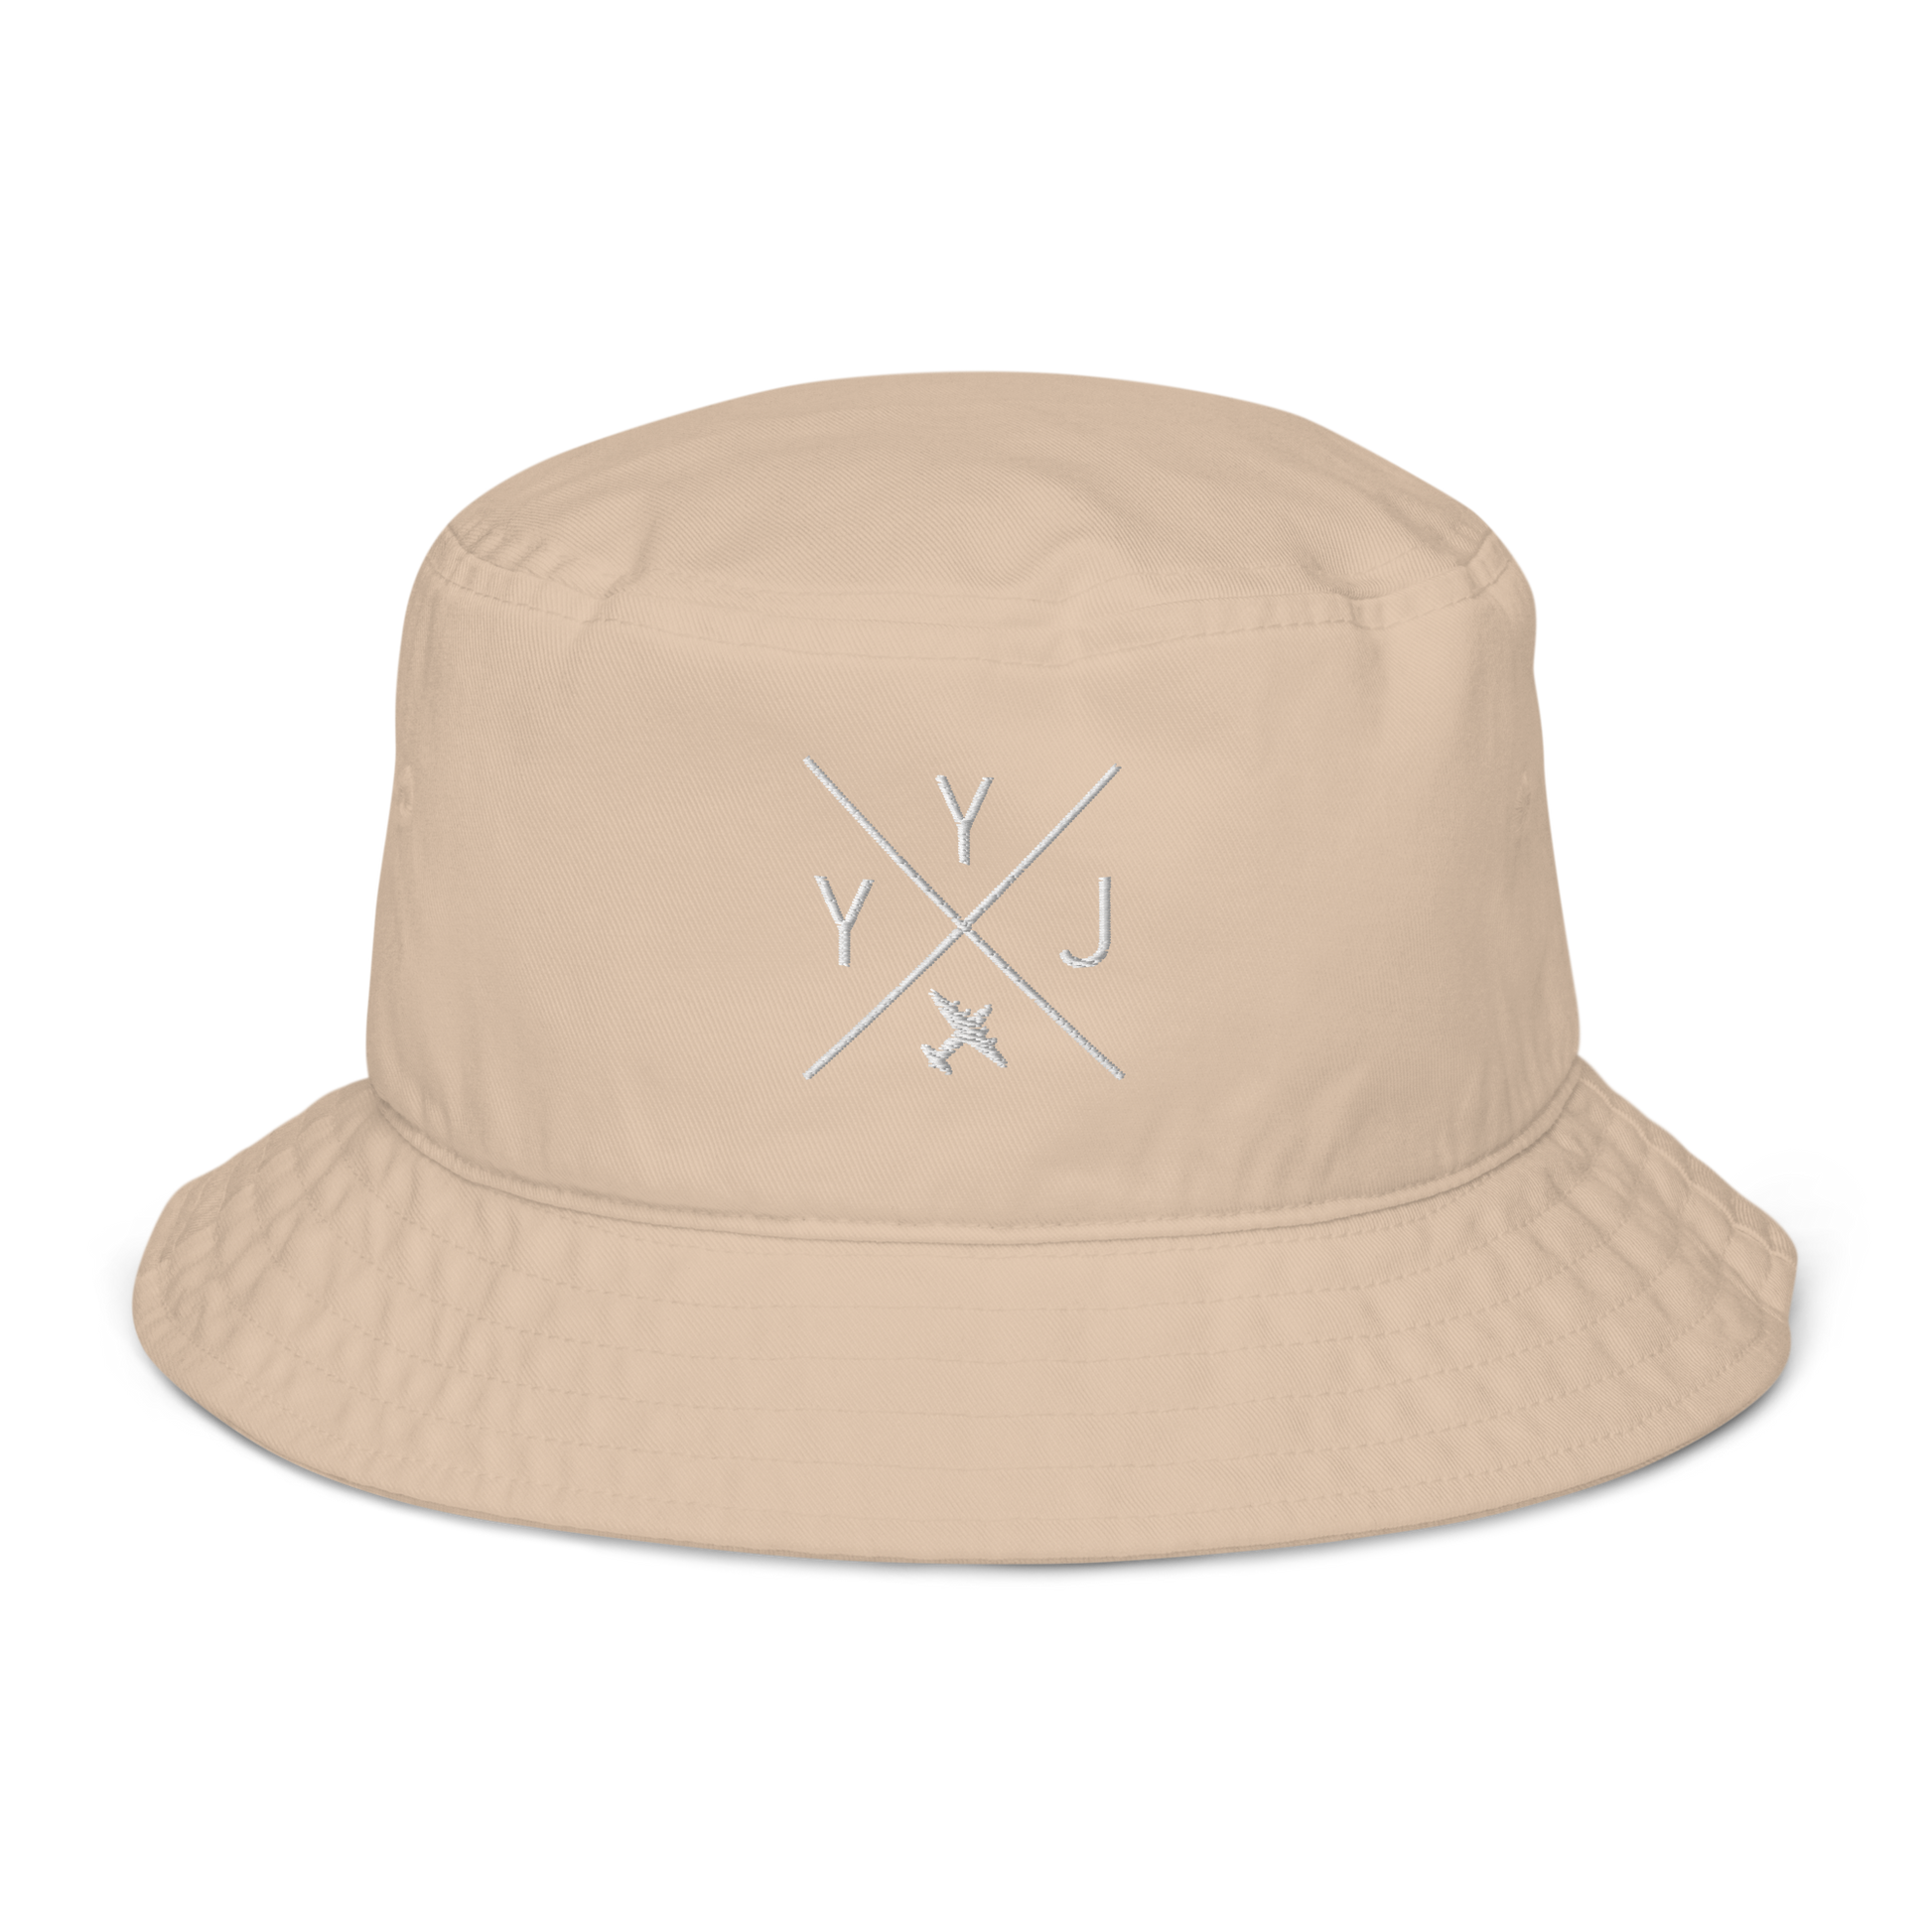 YHM Designs - YYJ Victoria Organic Cotton Bucket Hat - Crossed-X Design with Airport Code and Vintage Propliner - White Embroidery - Image 08